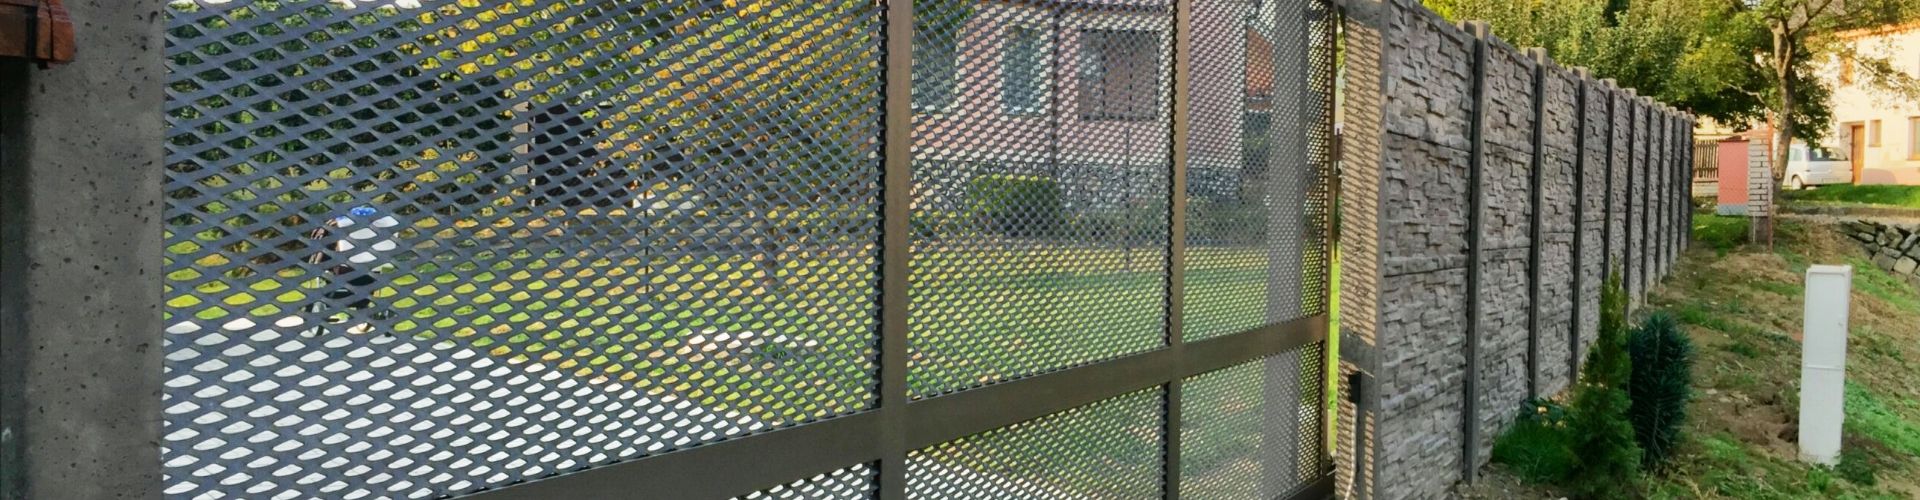 Expanded metal security fence is installed around the perimeter of residential community.